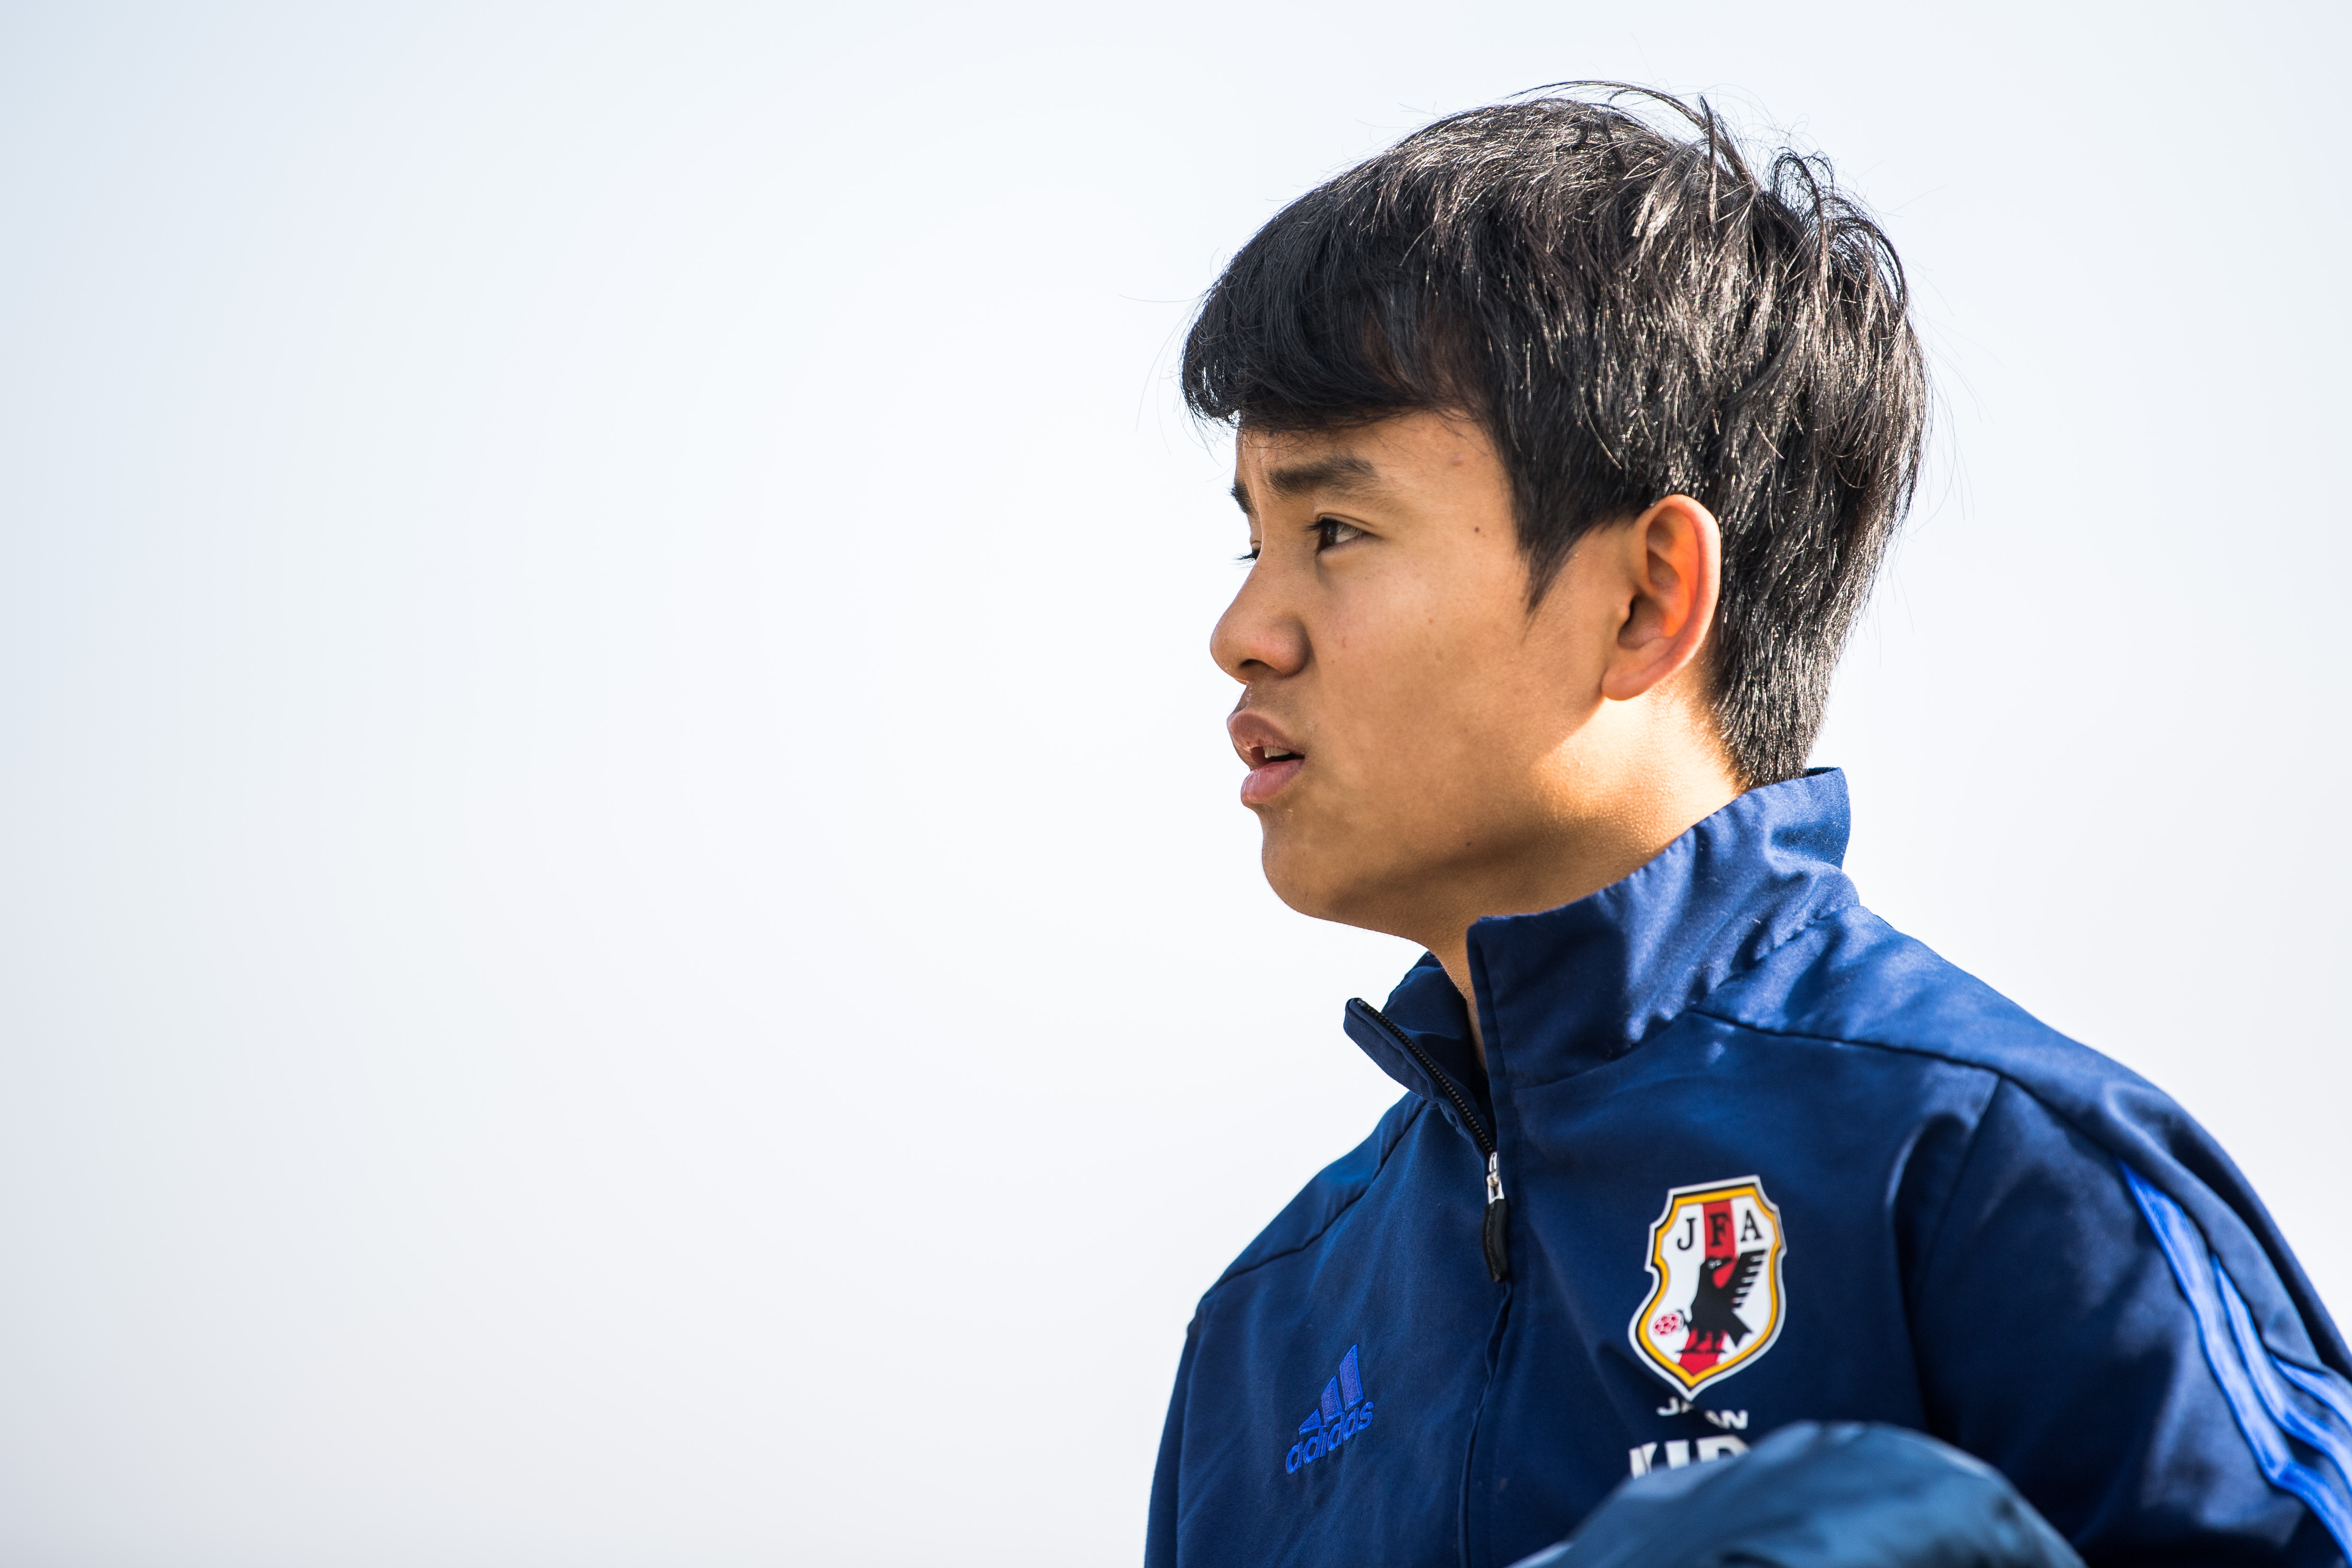 DUISBURG, GERMANY - MARCH 26: Takefusa Kubo of Japan arrives prior to a Friendly Match between MSV Duisburg and the U20 Japan on March 26, 2017 in Duisburg, Germany. (Photo by Lukas Schulze/Getty Images)